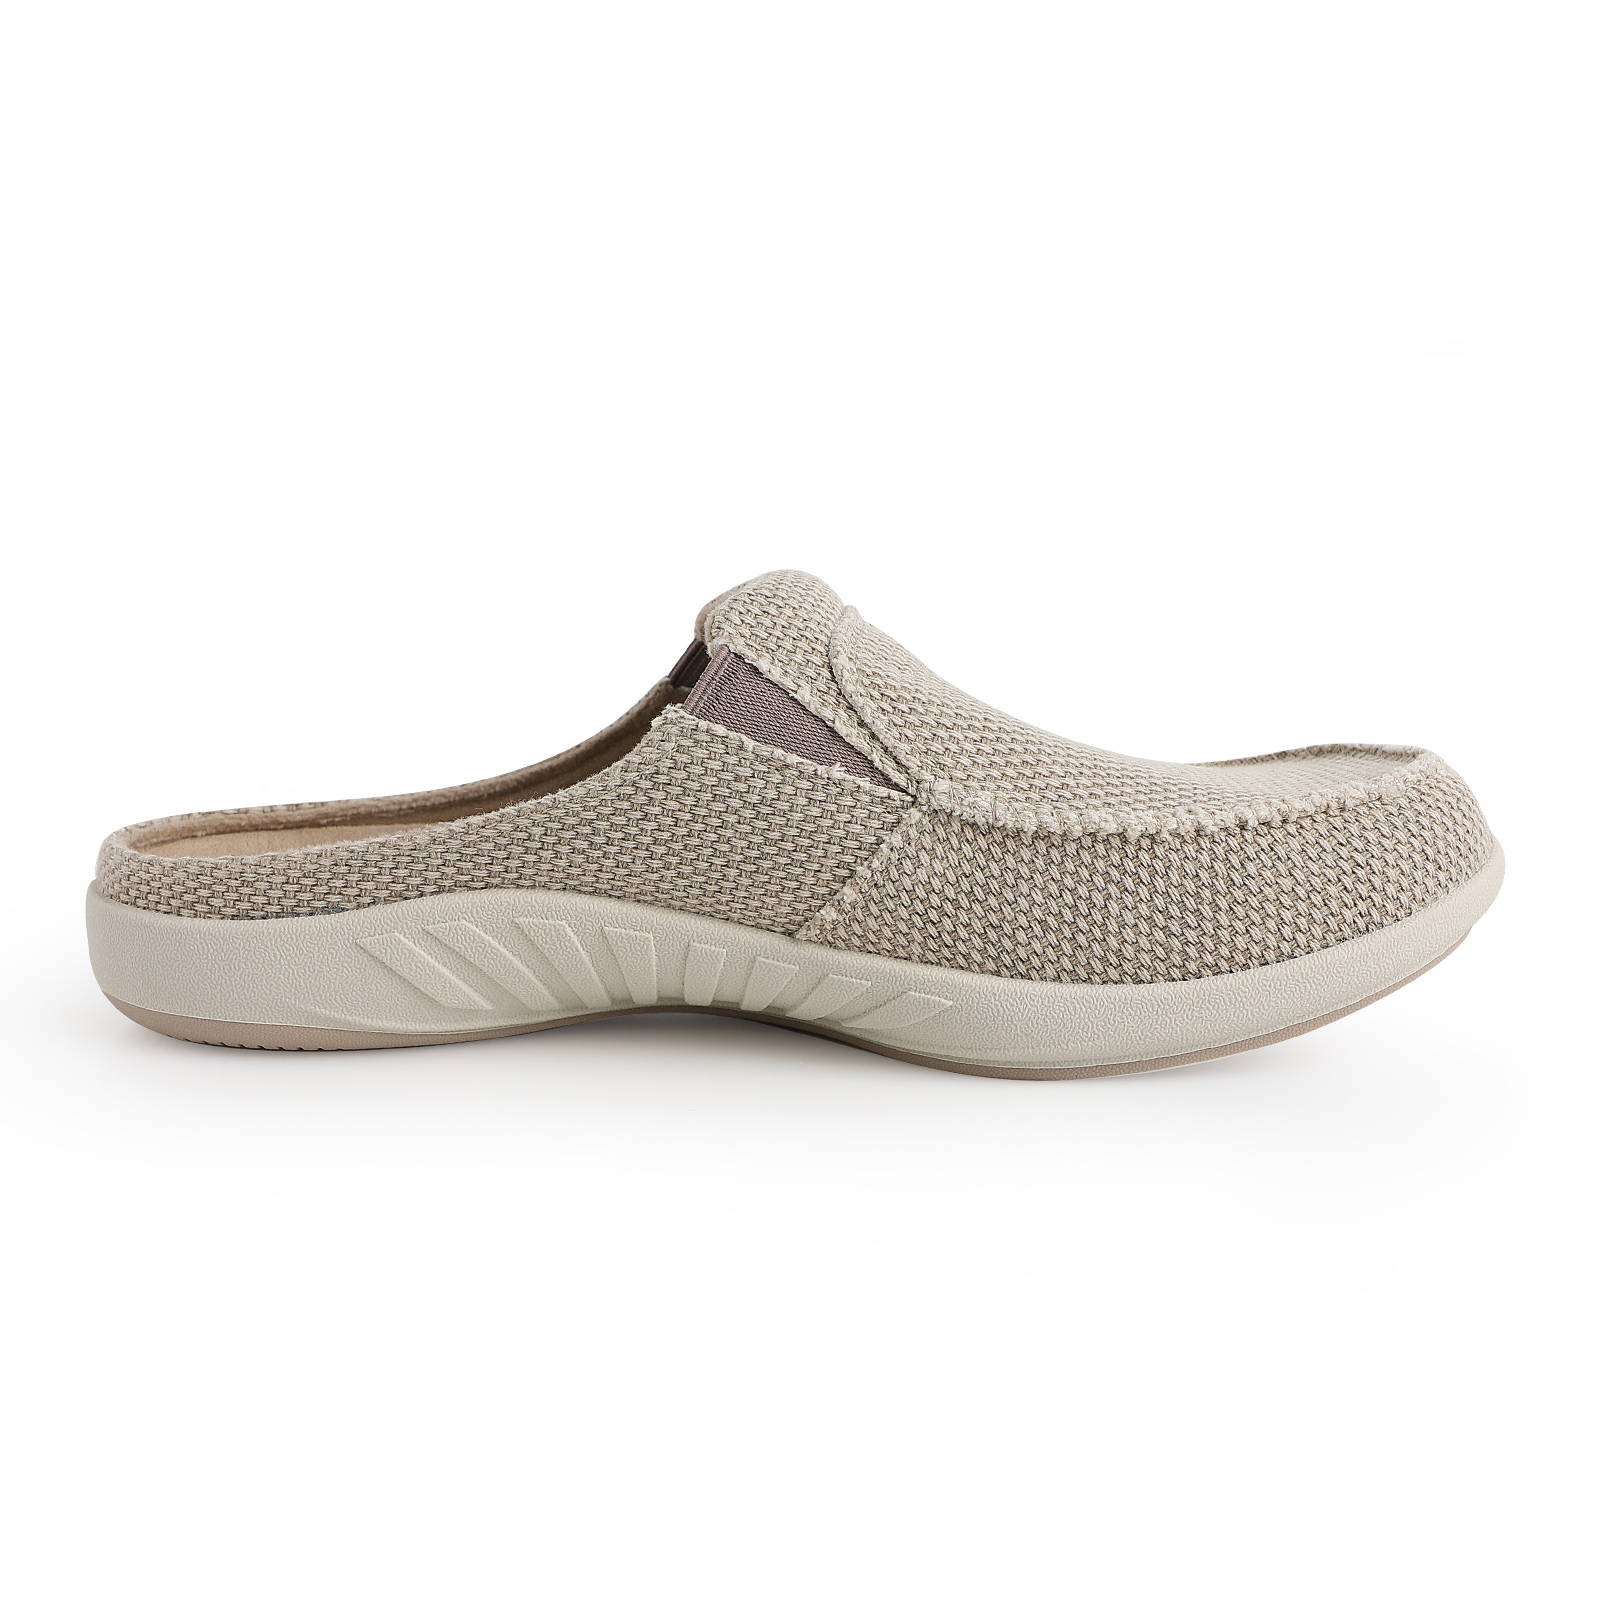 house shoes with arch support